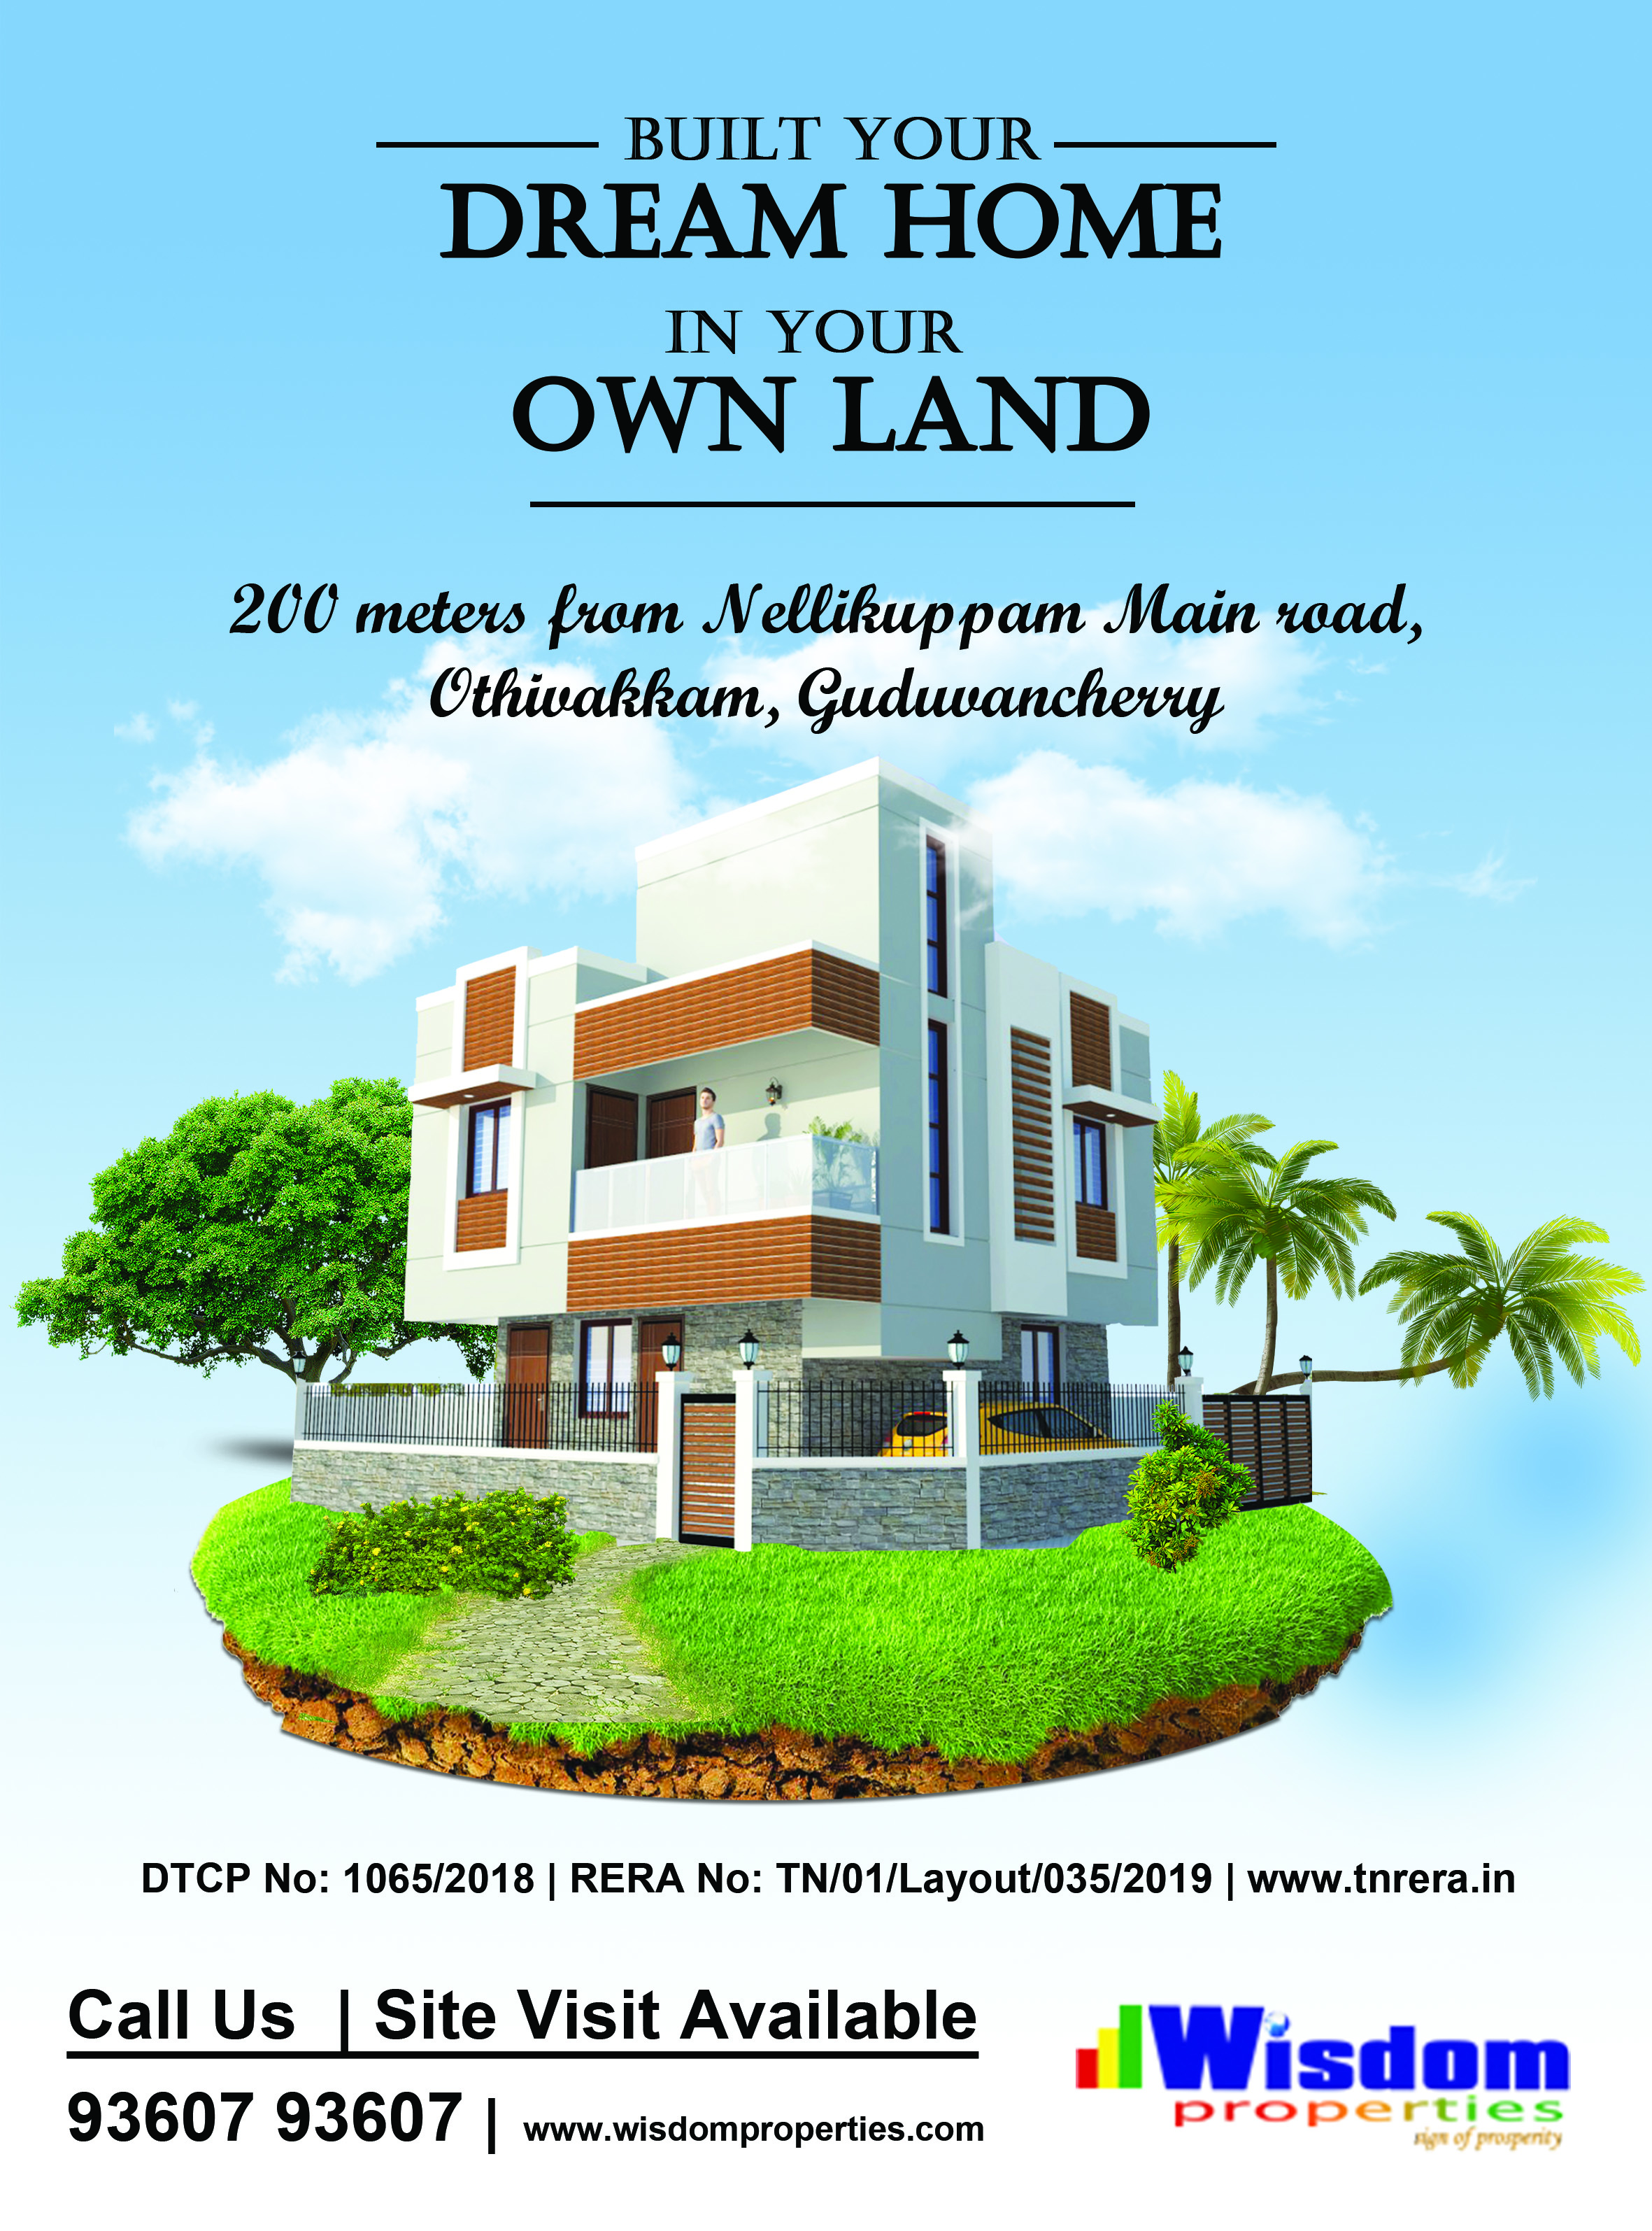 Built your dream home in own lands